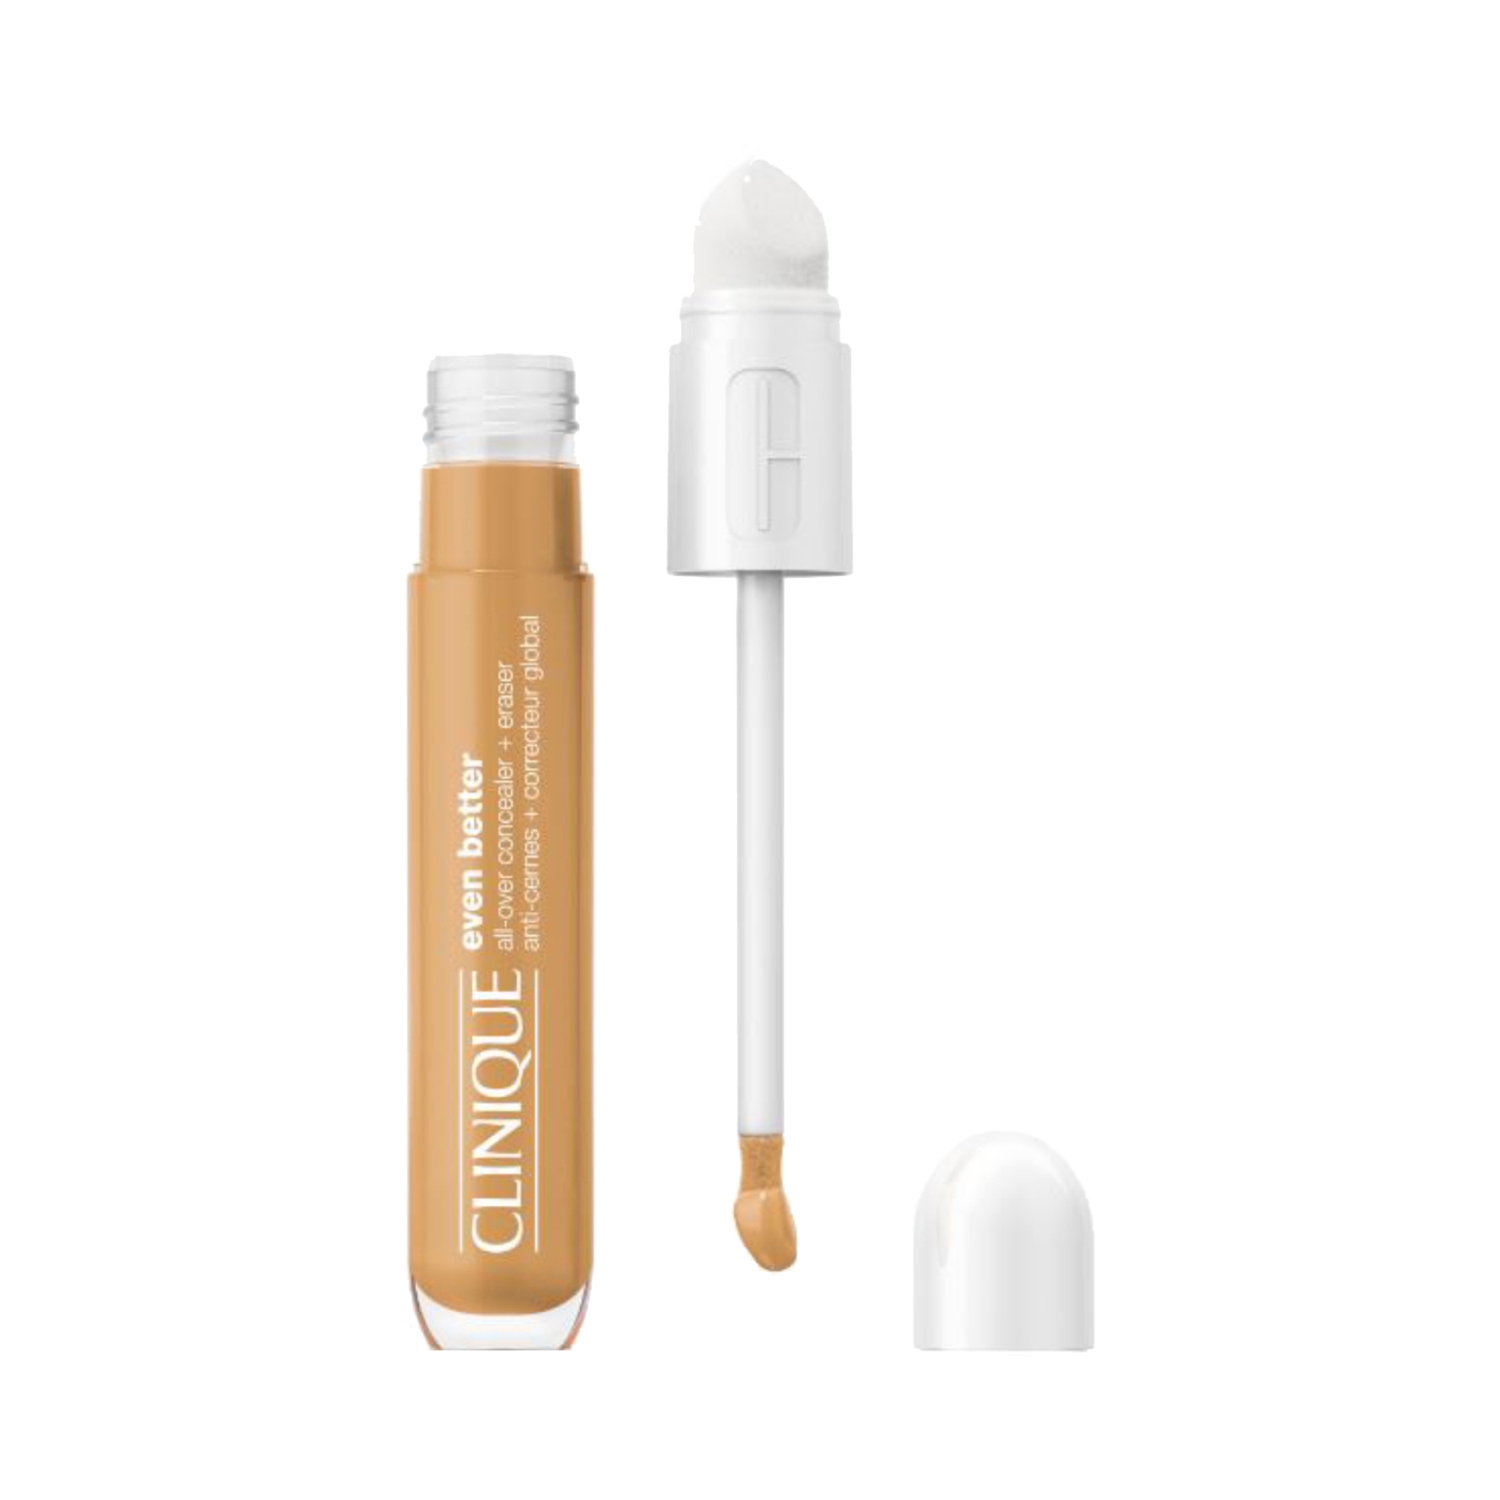 CLINIQUE | CLINIQUE Even Better All Over Concealer + Eraser - 53 Toasted (6ml)